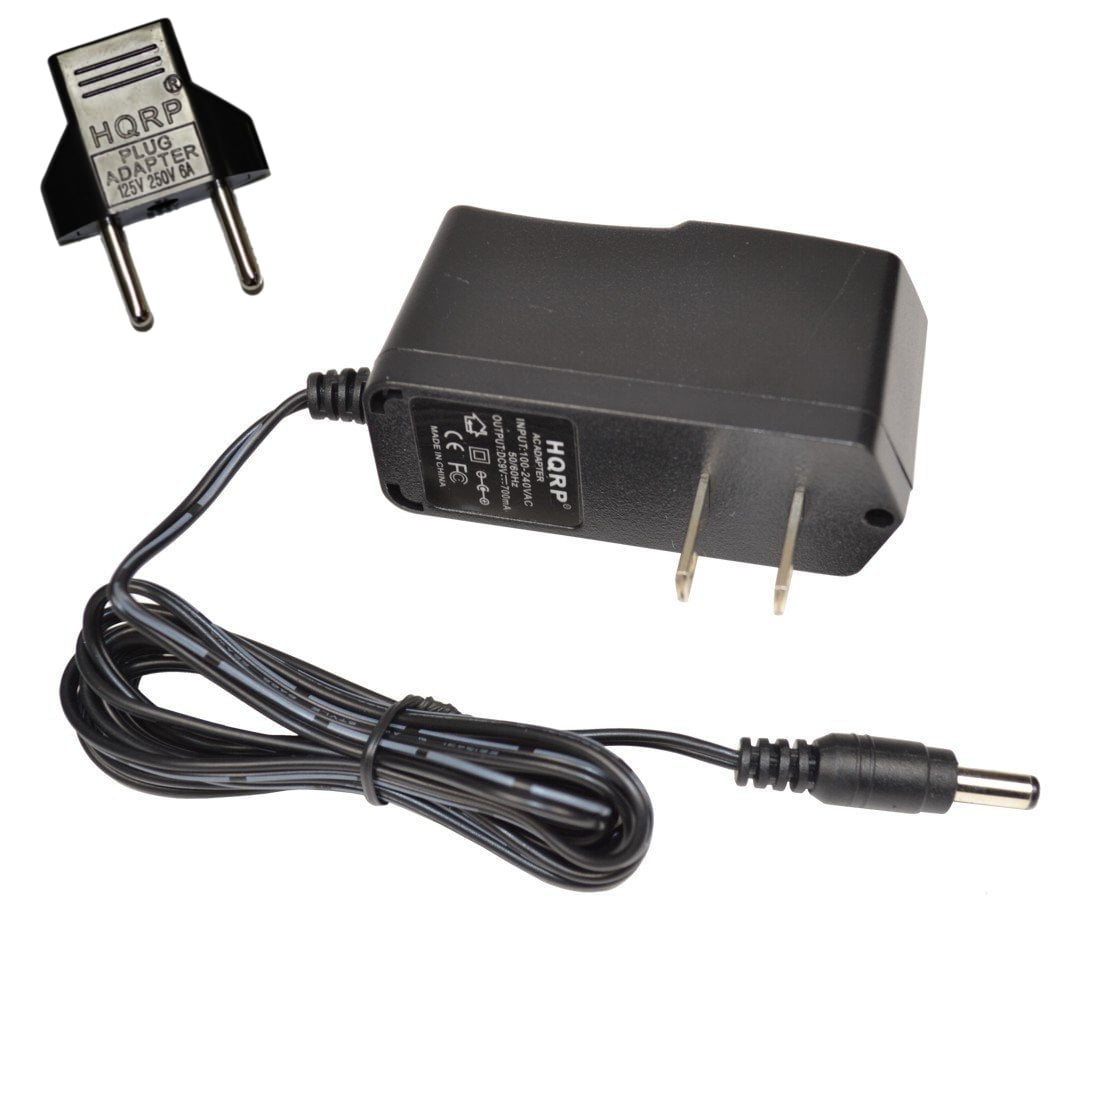 Official OEM Leap Frog AC Adapter for Leapster Explorer & LeapPad 690-11213 